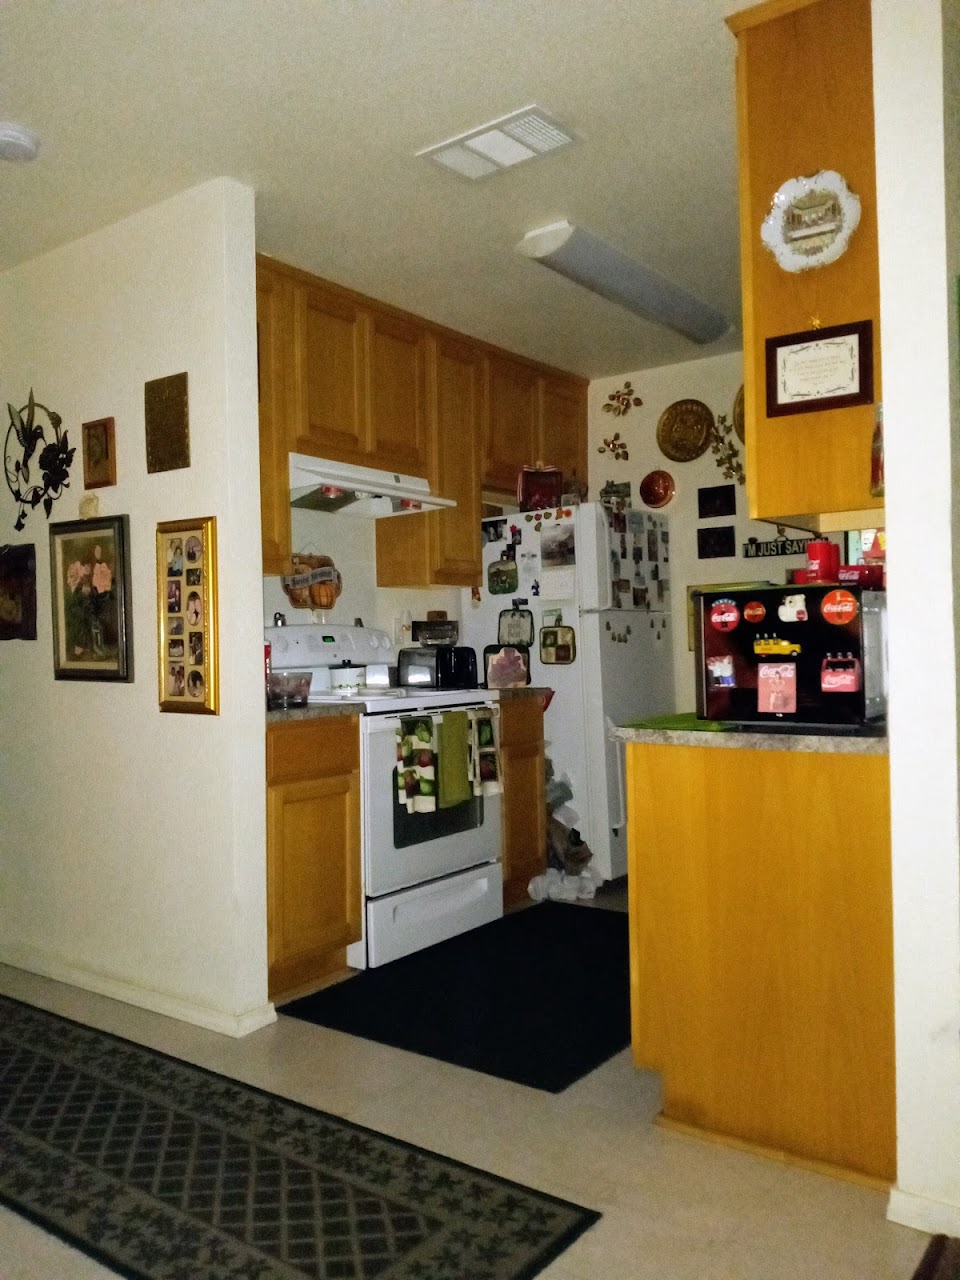 Photo of WATERFORD GARDENS. Affordable housing located at 12313 DORSEY ST WATERFORD, CA 95386